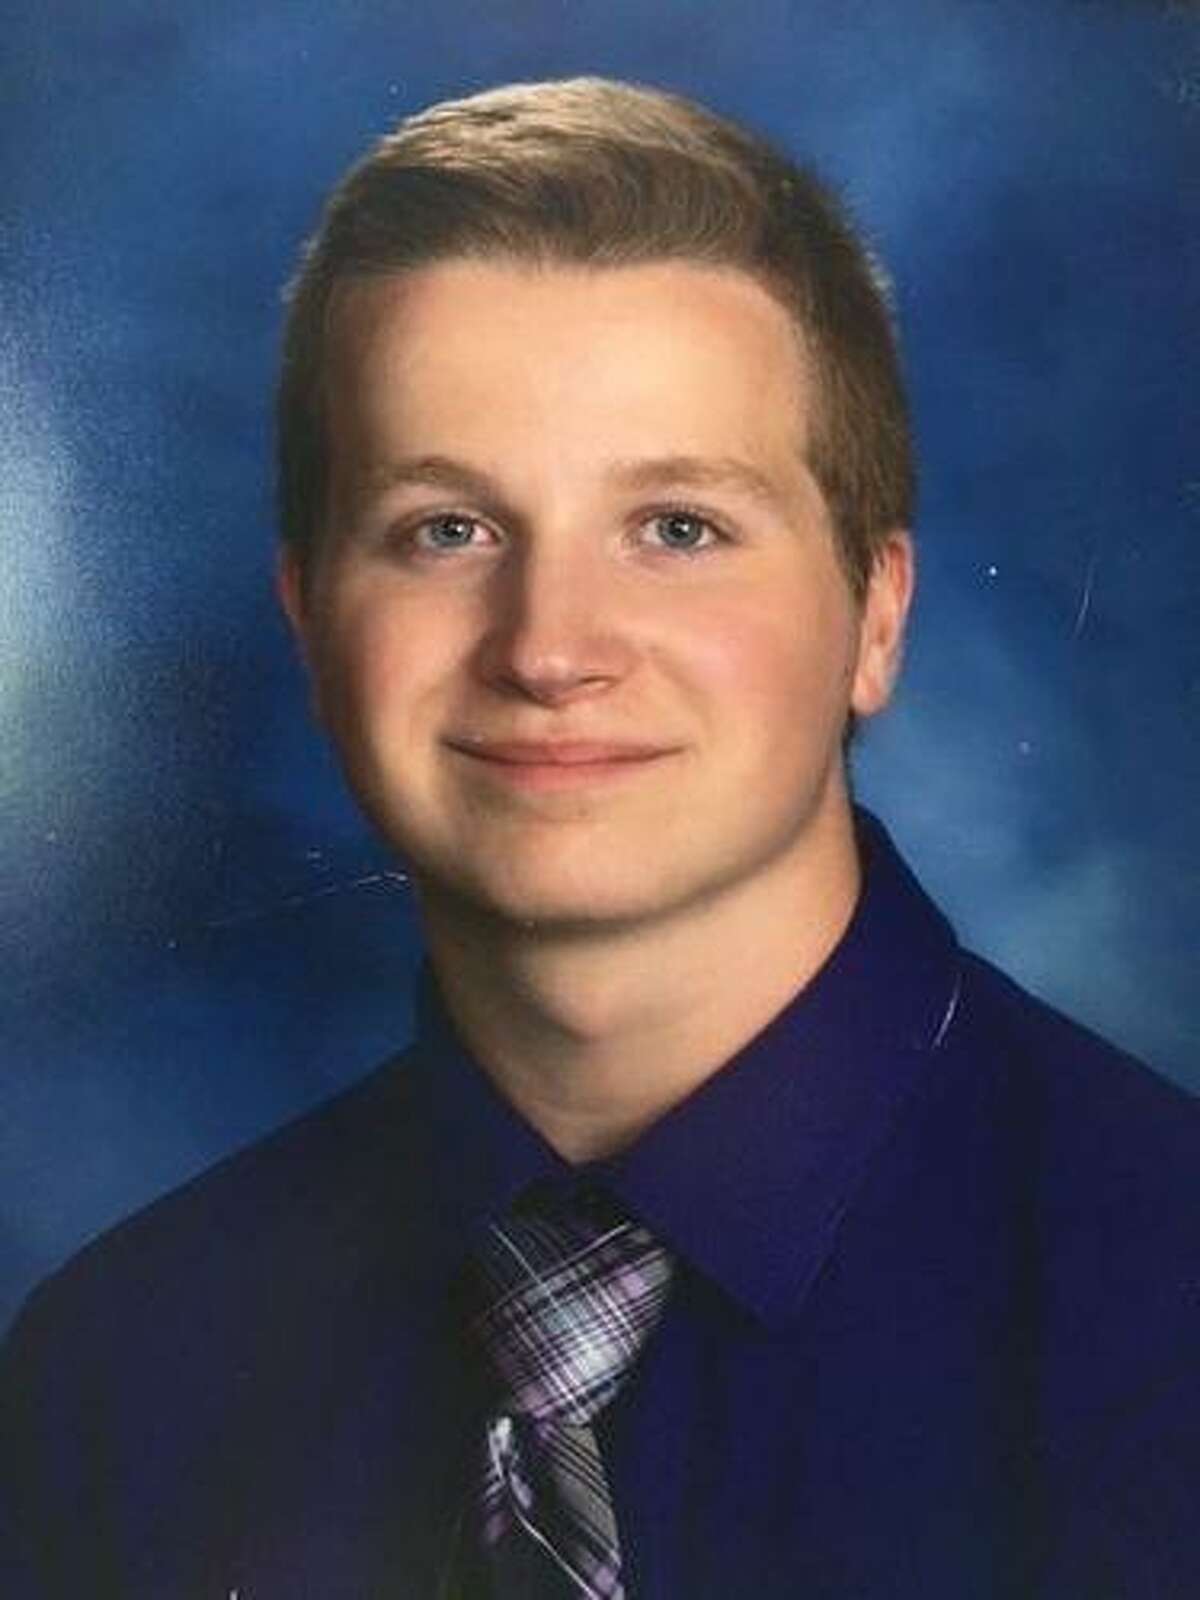 Daniel Engstrom, 21, died on April 23 in a motorcycle crash in Monroe. He was a graduate of New Milford High School in 2019.